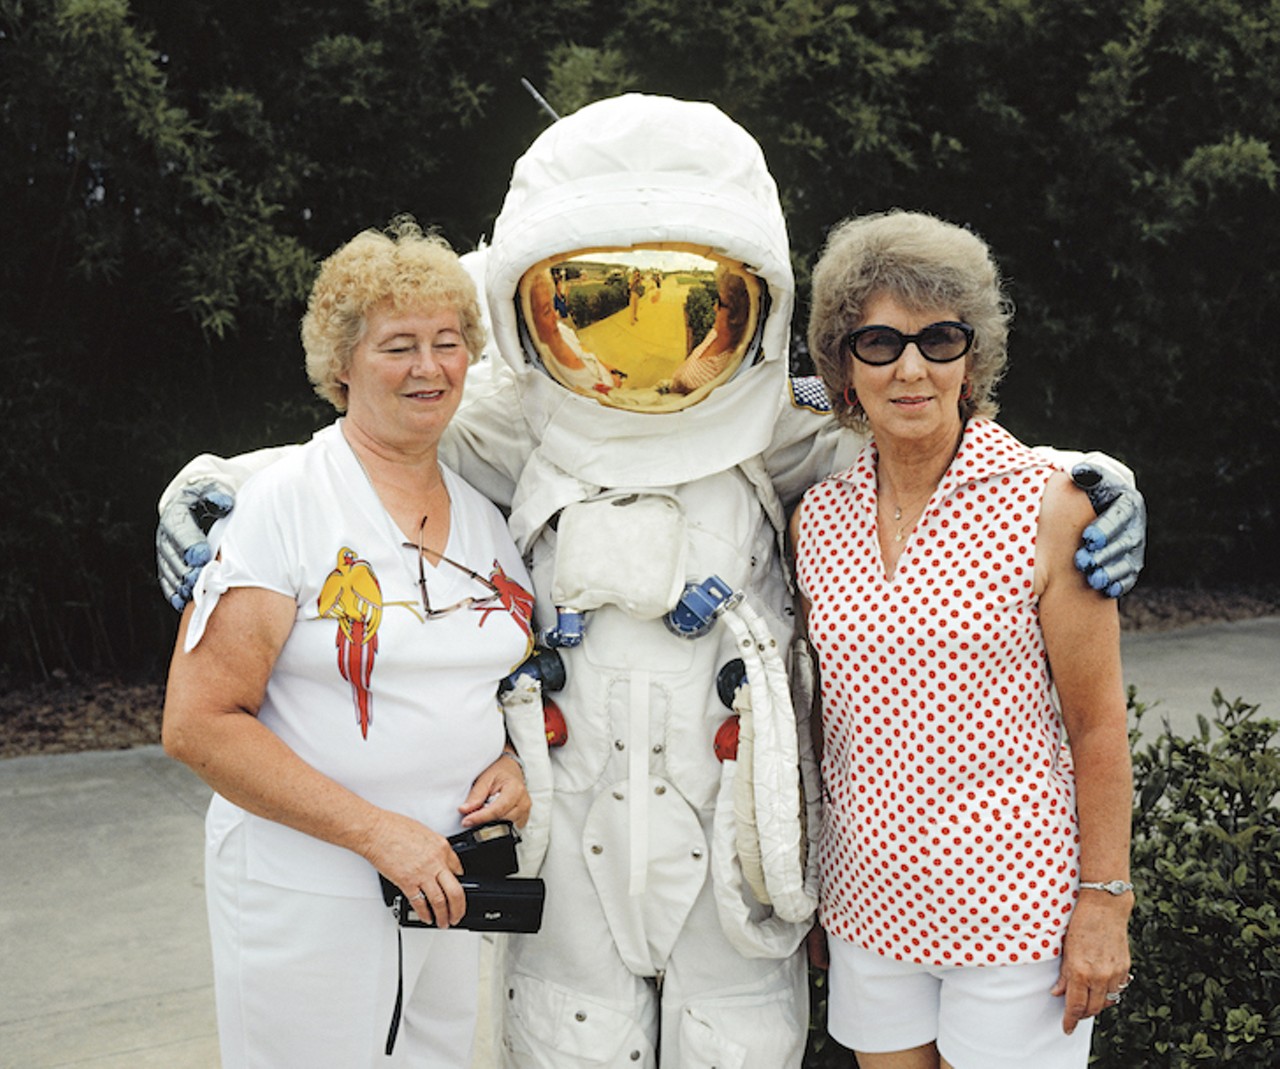 Tourists to the Kennedy Space Center in Orlando, Florida posing with a pretend astronaut in an Apollo spacesuit. Administered by NASA, KSC is a major tourist attraction for tourists to the Orlando area. Two million people visited in 1981, making KSC the fourth most popular destination for Florida tourism. 1981.